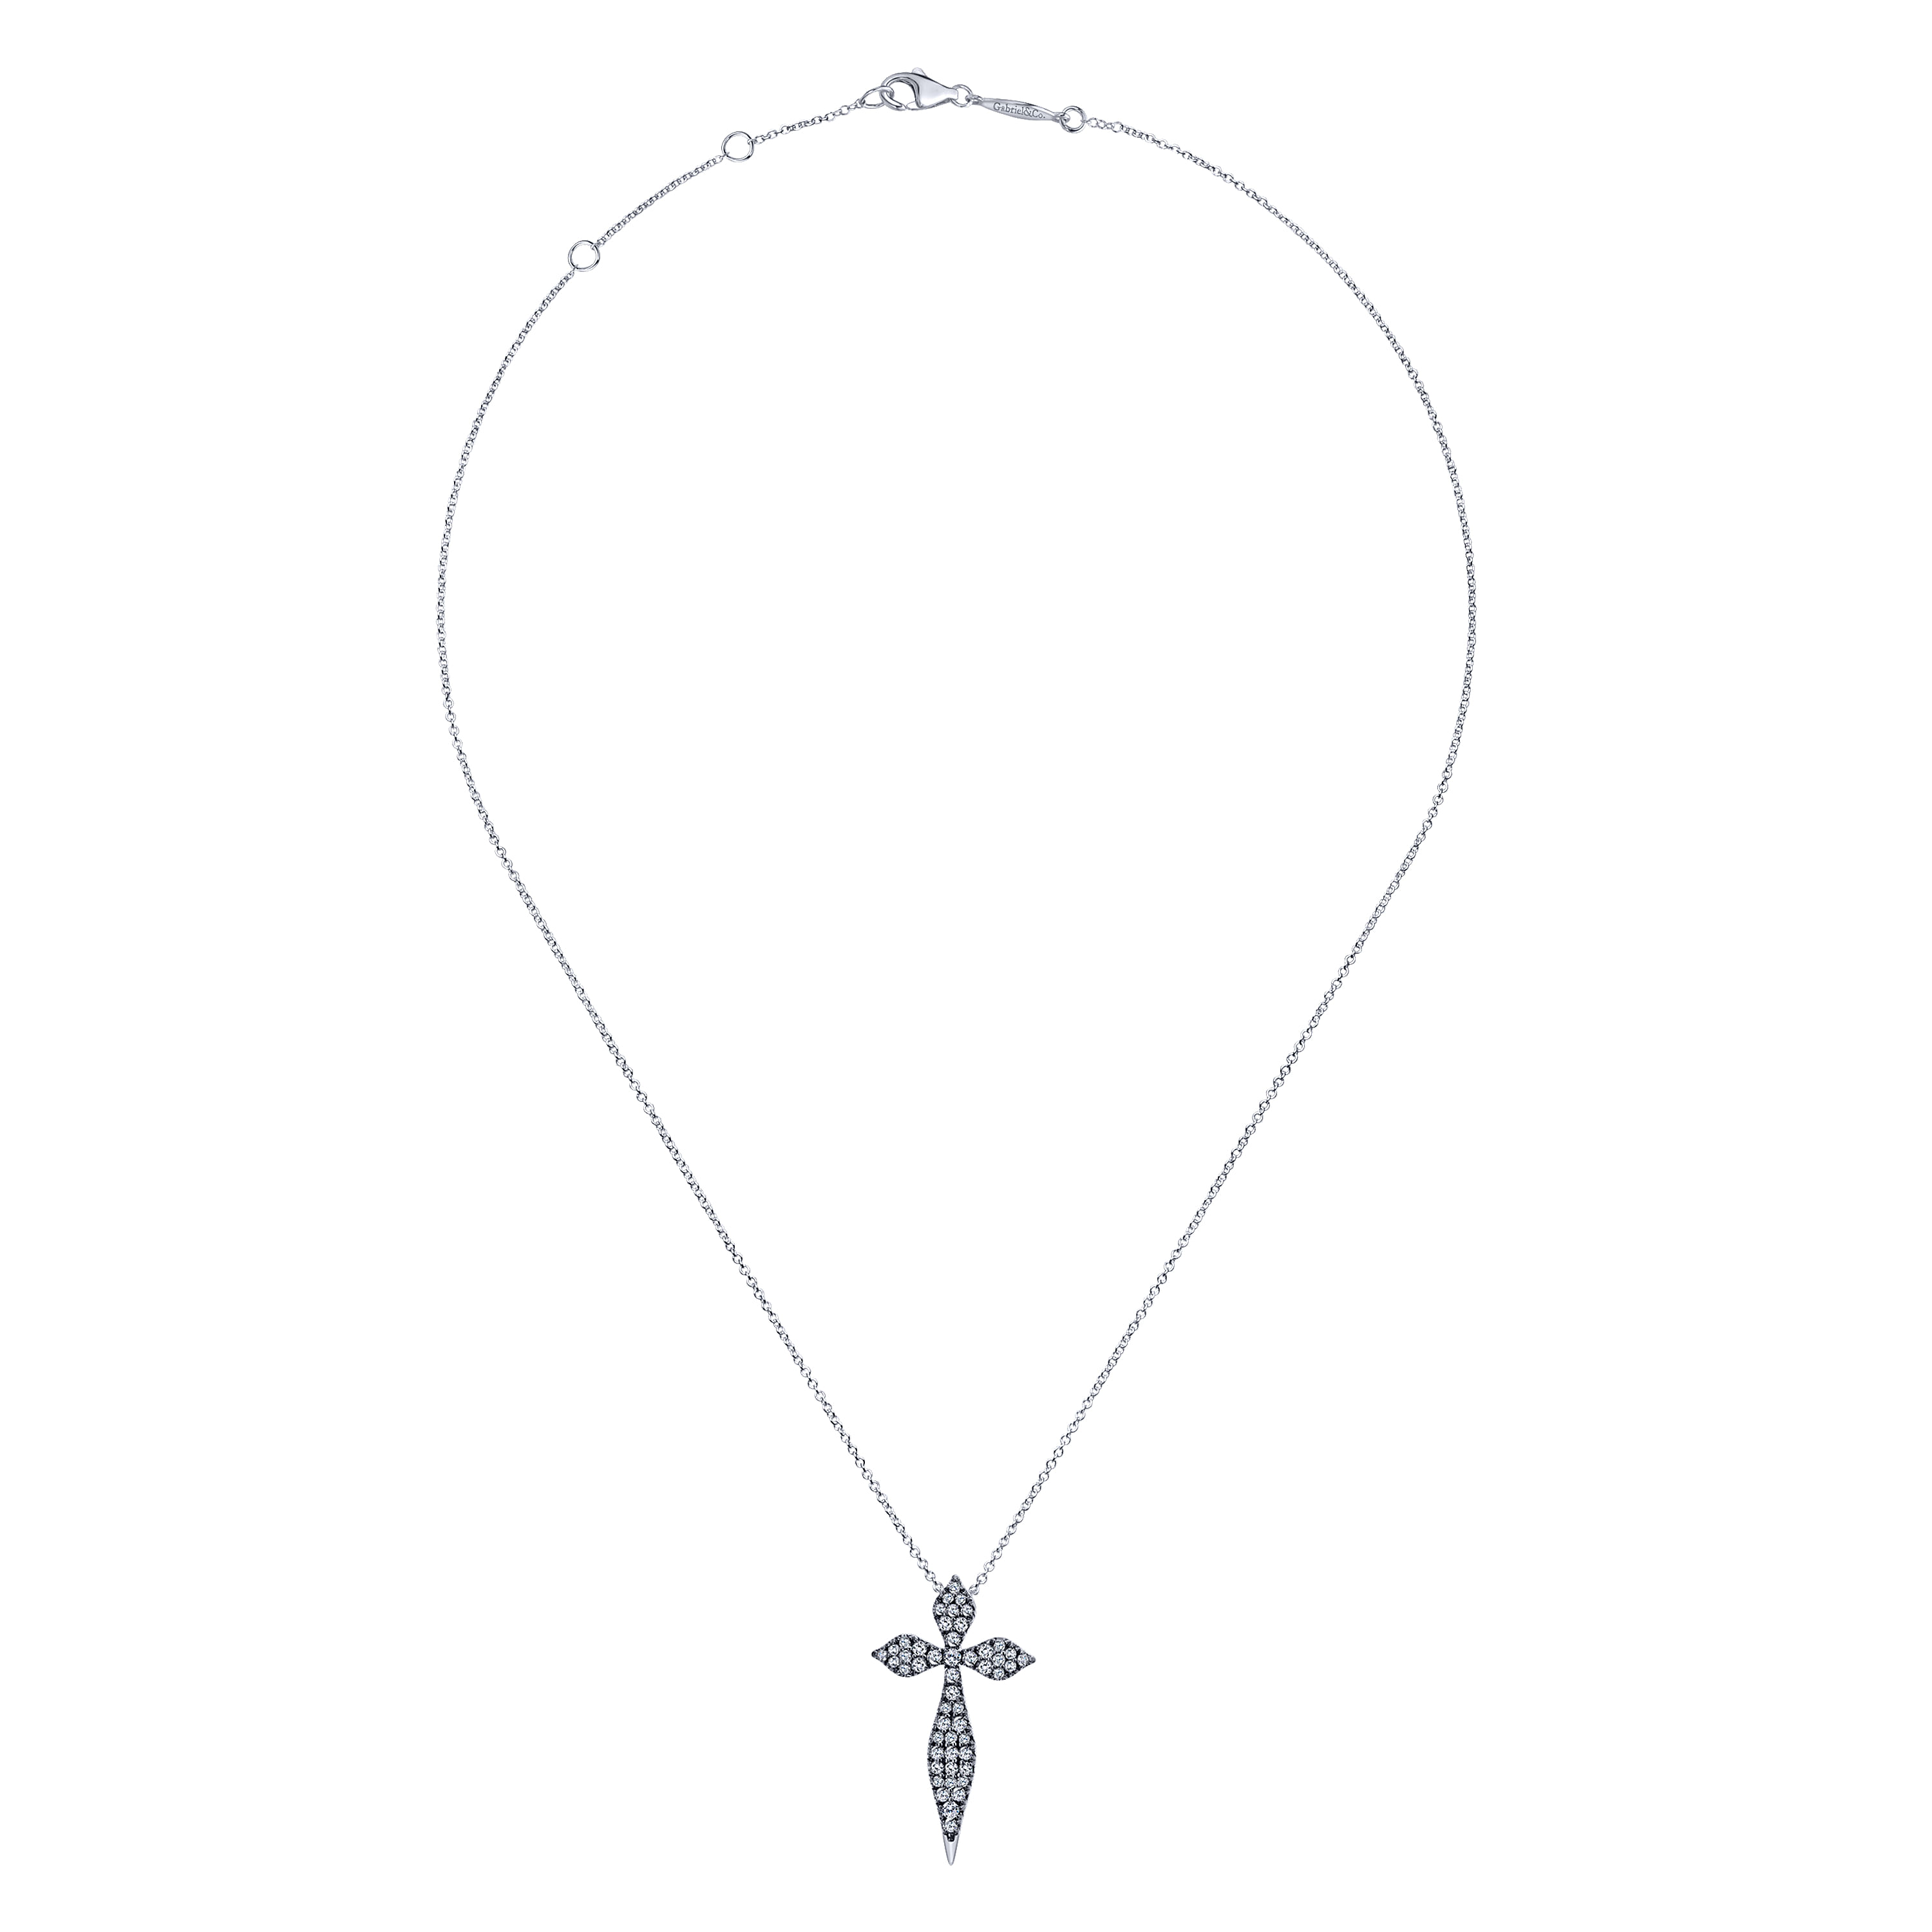 925 Sterling Silver White Sapphire Spike Cross Pendant Necklace